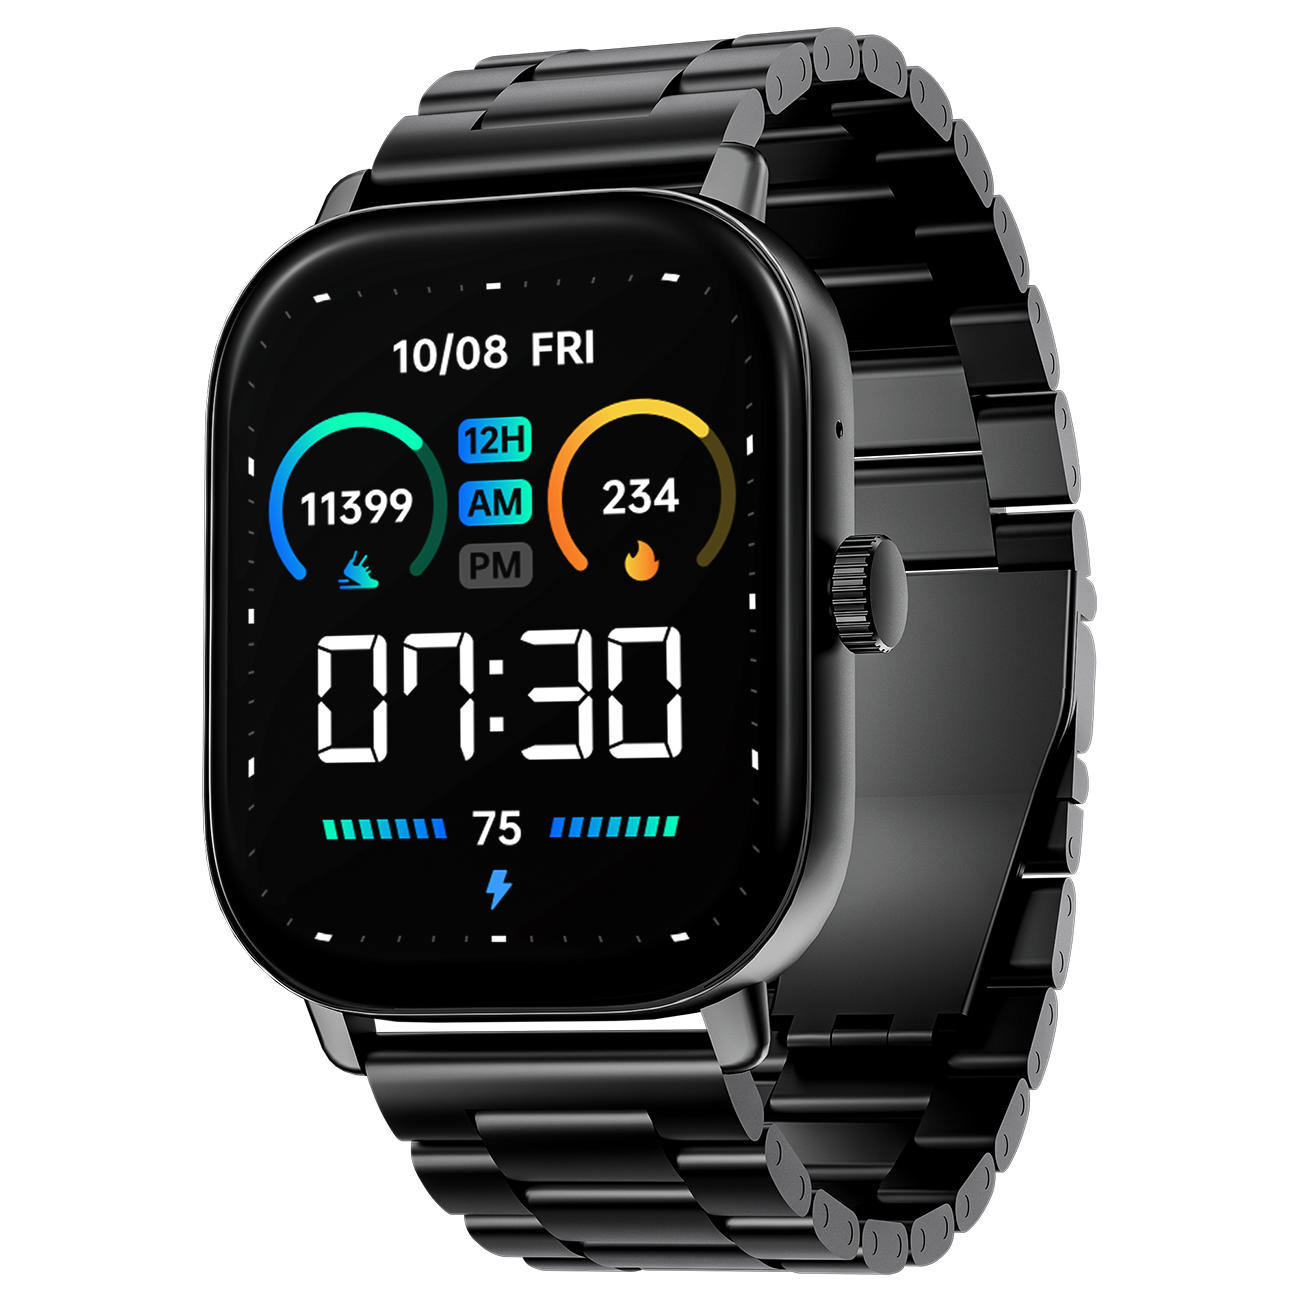 boAt Wave Spectra | Smartwatch with 2.04" AMOLED Display, Animated Watch Faces, 100+ Sports Modes, IP68 Dust Resistance